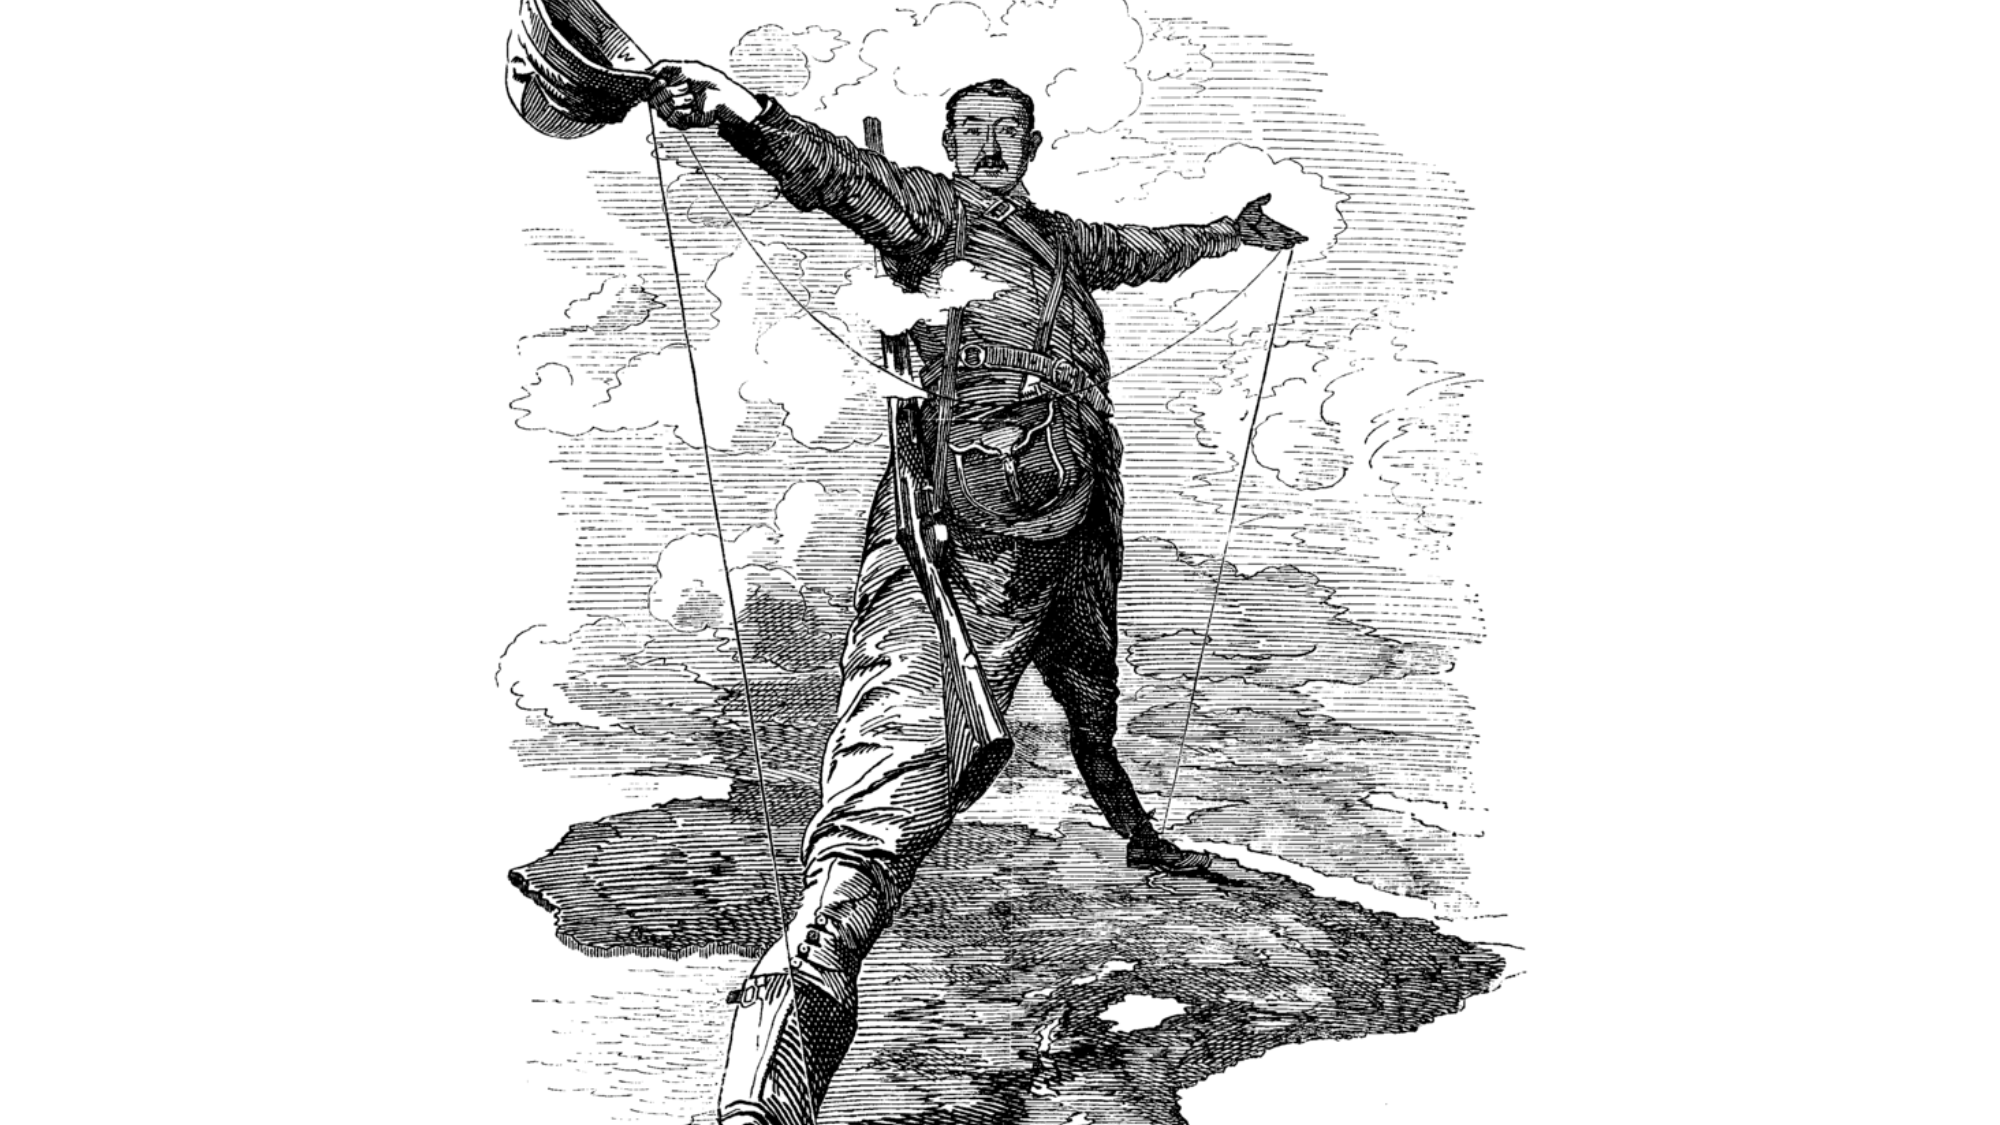 An editorial cartoon published in Punch magazine in 1892 references the Scramble for Africa, in which seven European powers divided the continent up amongst themselves.